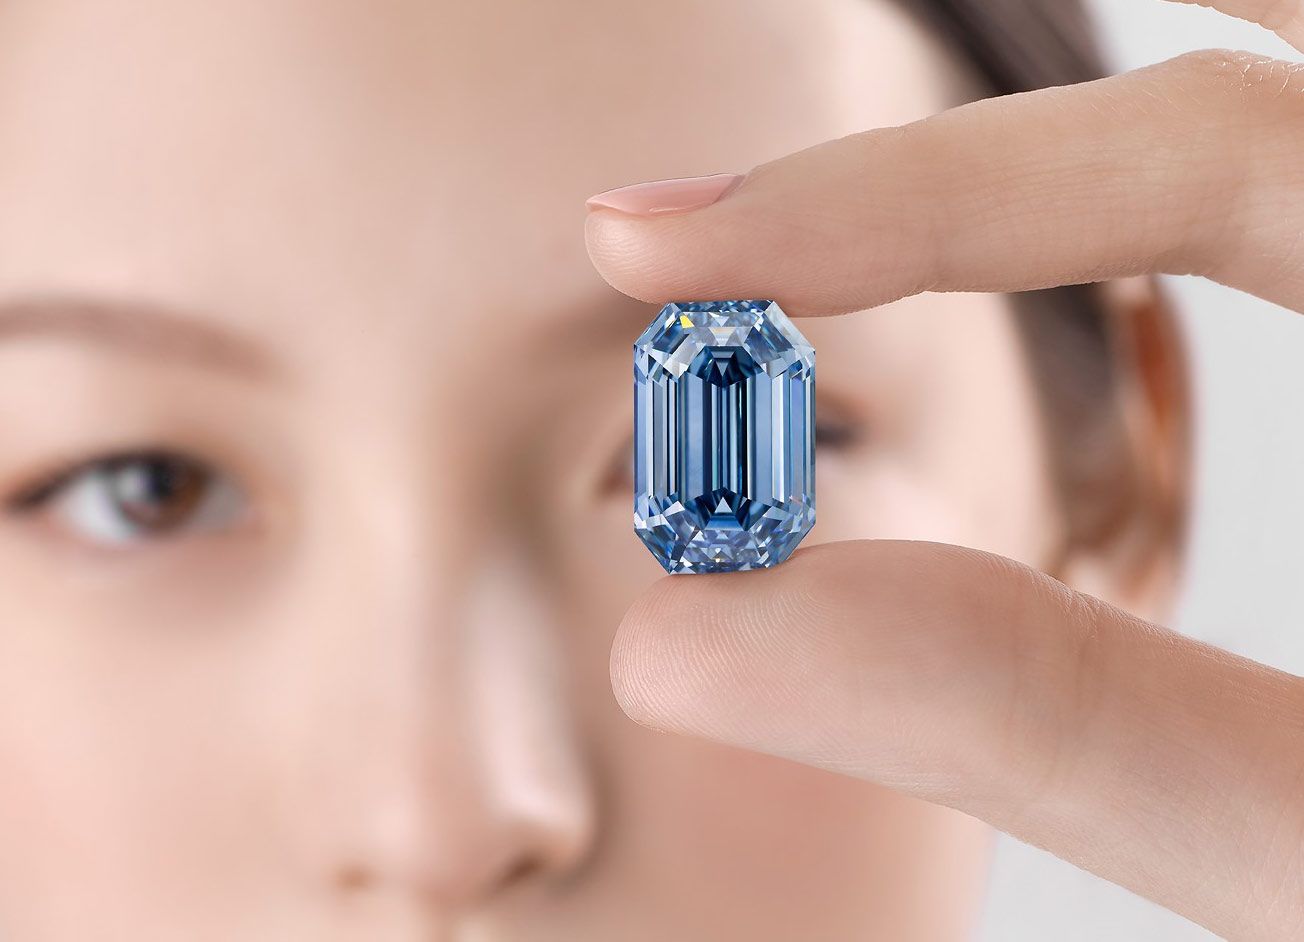 The De Beers Blue diamond at 15.1 carats